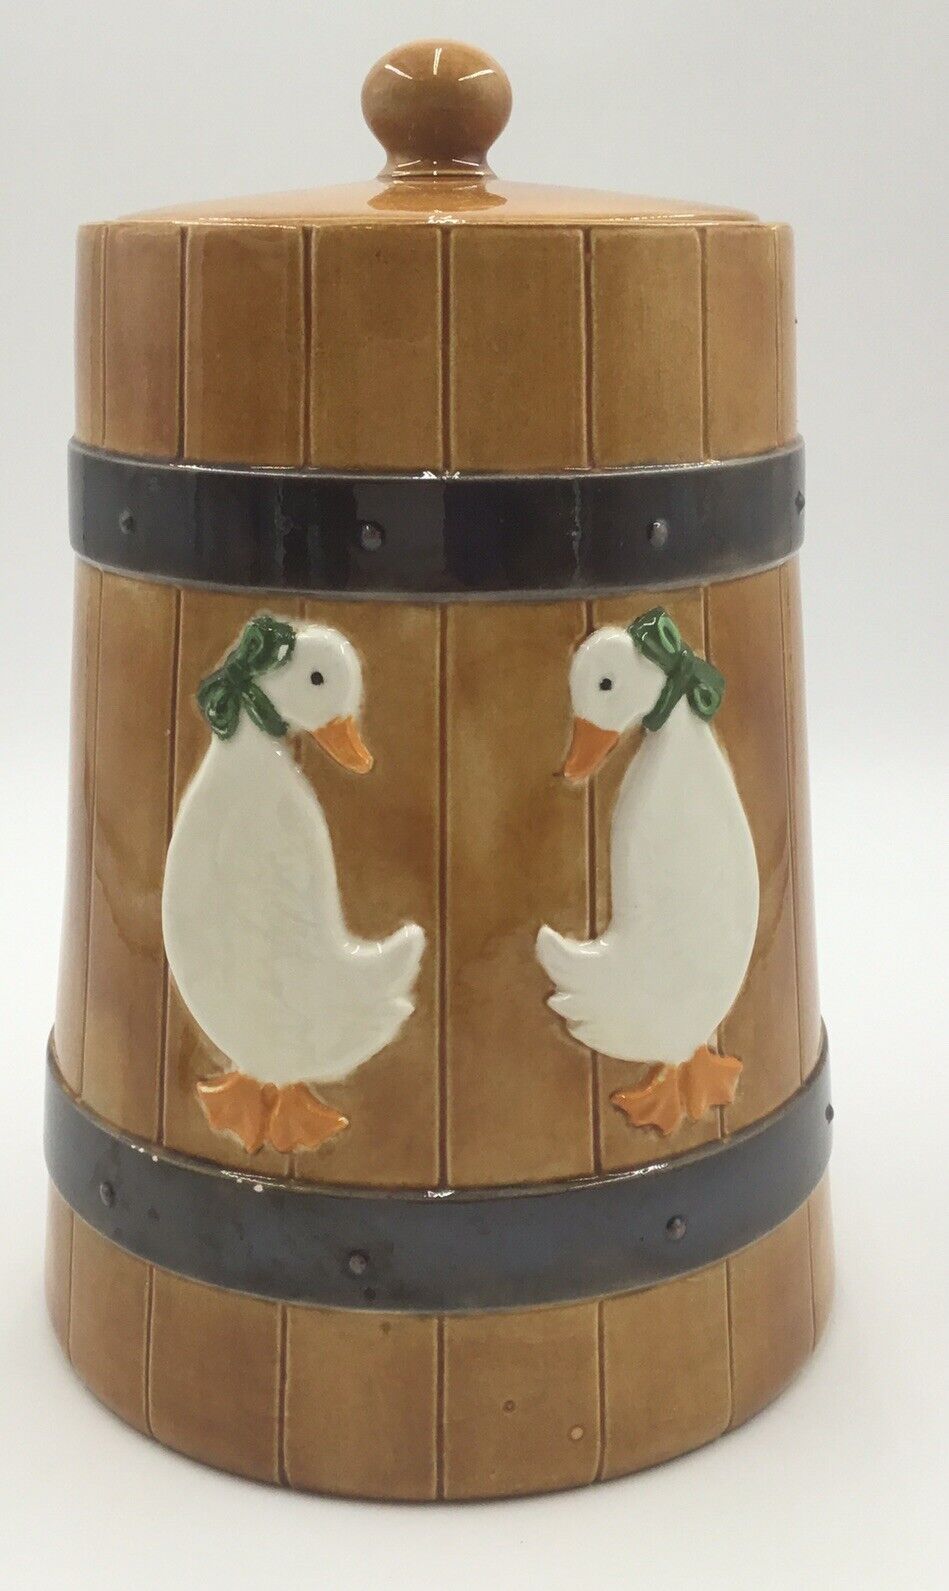 Churn Duck Canister Large Vintage Pottery Brown W/ Ducks Green Bows 10”Tall